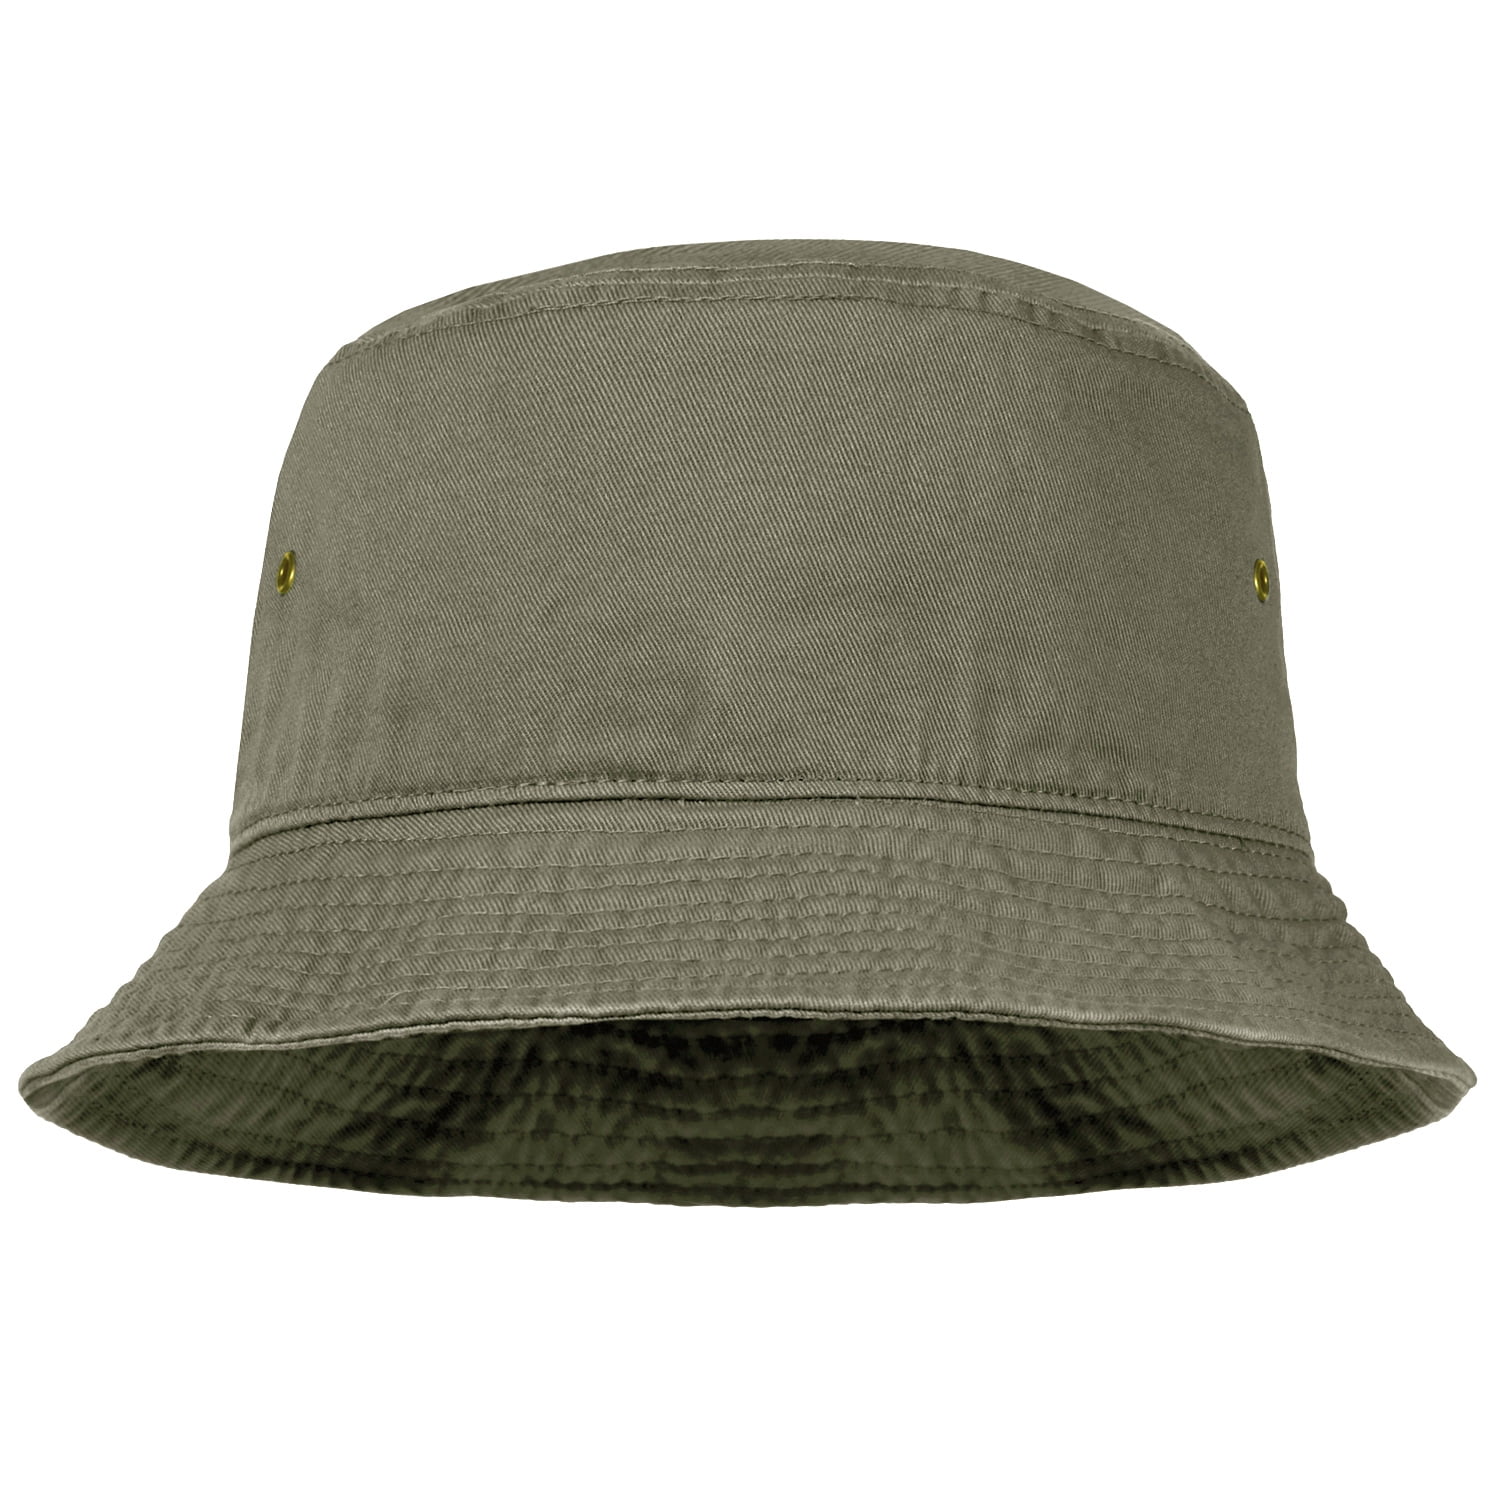 Bucket Hat for Men Women Unisex 100% Cotton Packable Foldable Summer Travel  Beach Outdoor Fishing Hat - SM Olive